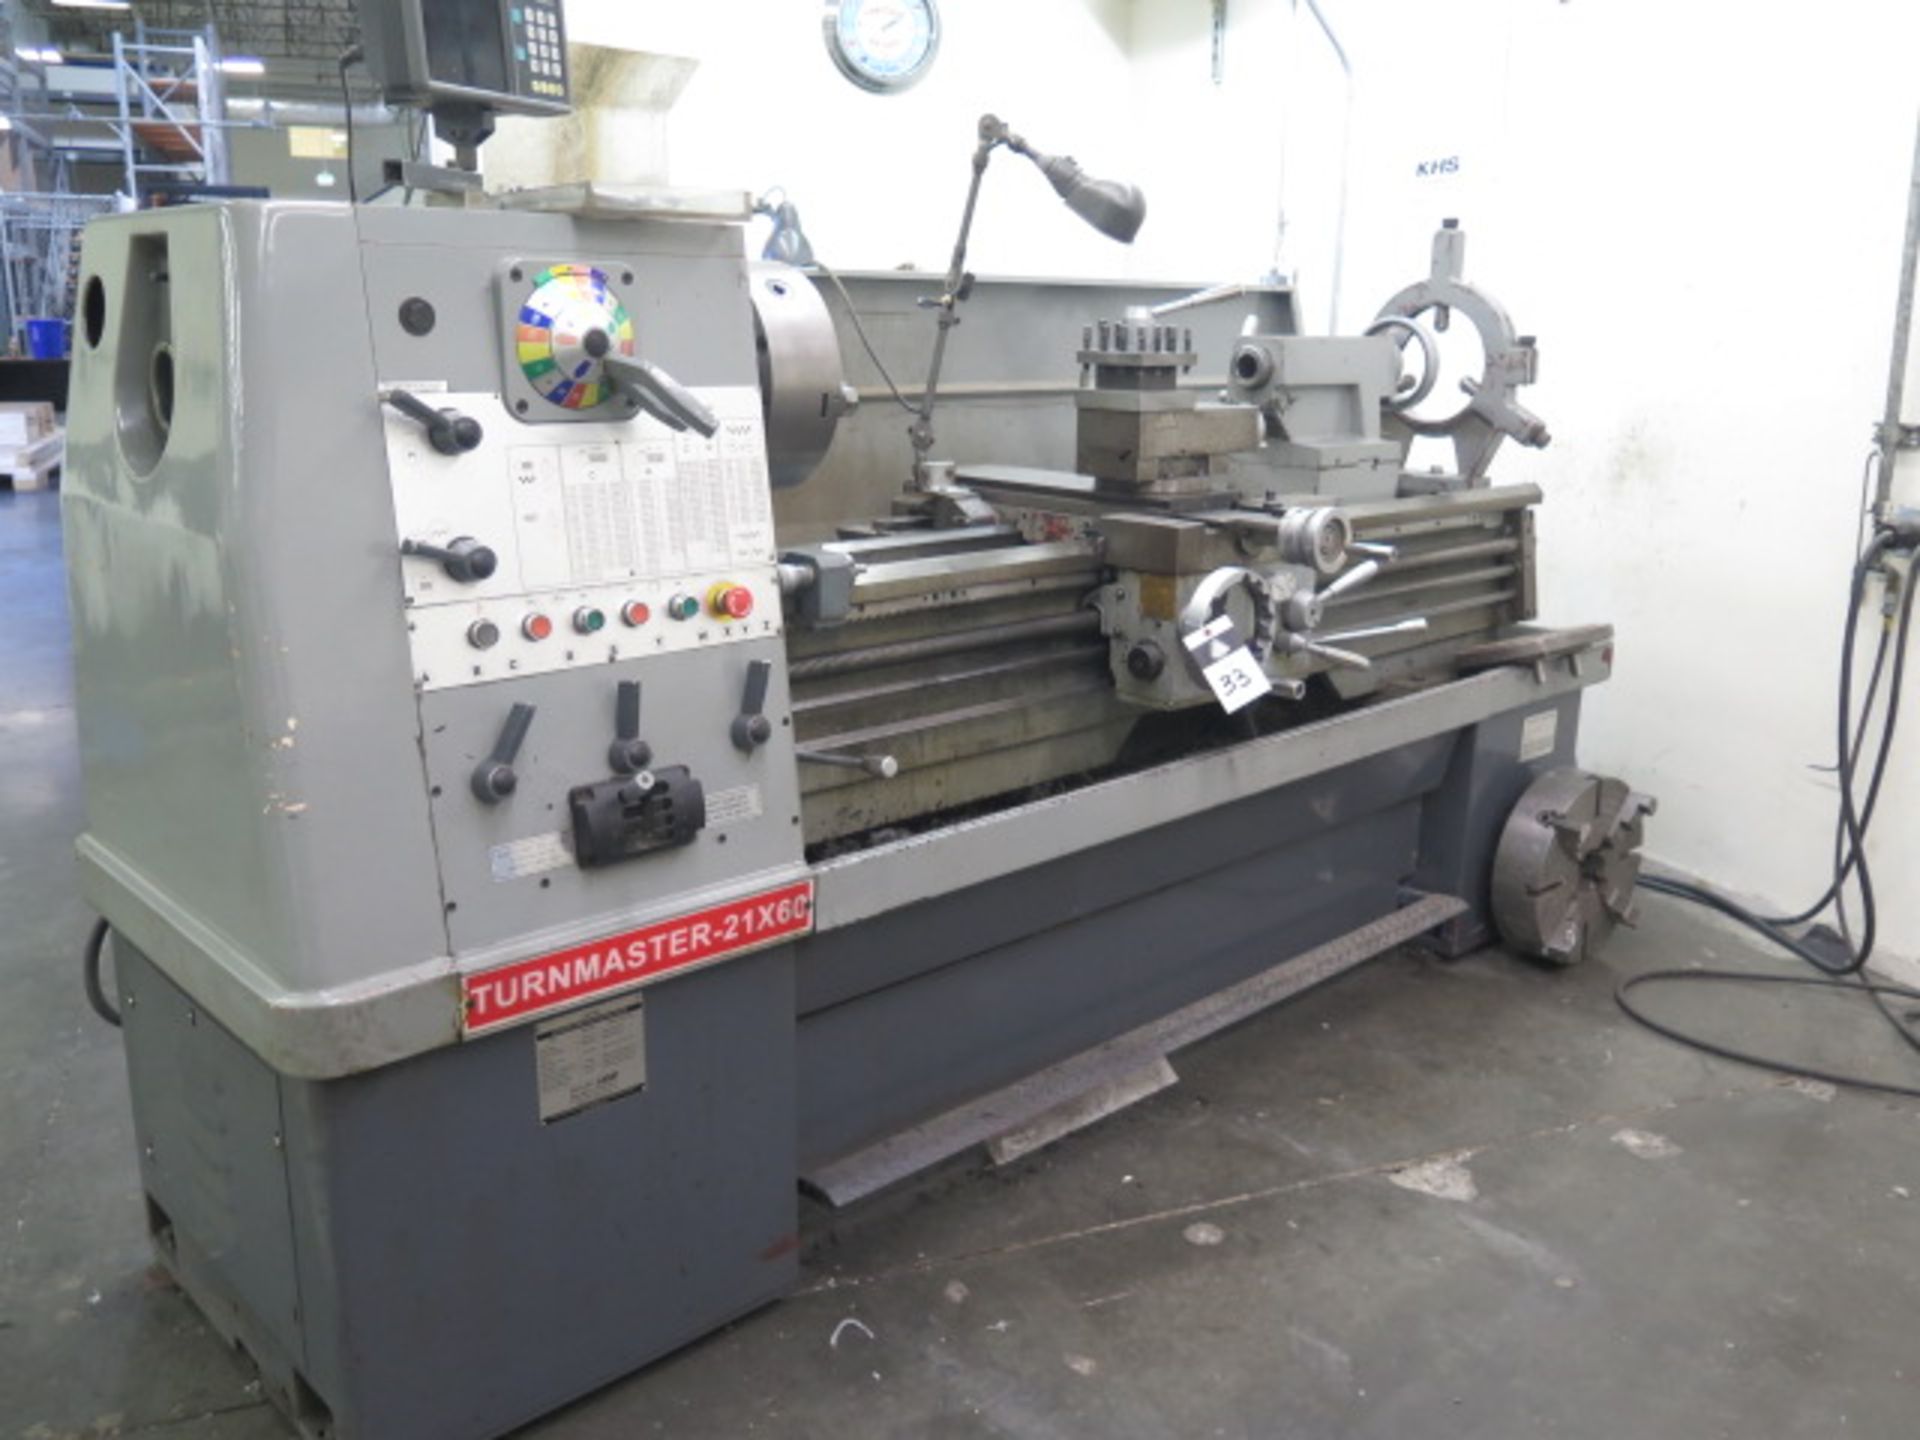 Lagun Turnmaster 21” x 60” Geared Gap Bed Lathe w/ Anilam Wizard 211 Programmable DRO, SOLD AS IS - Image 2 of 13